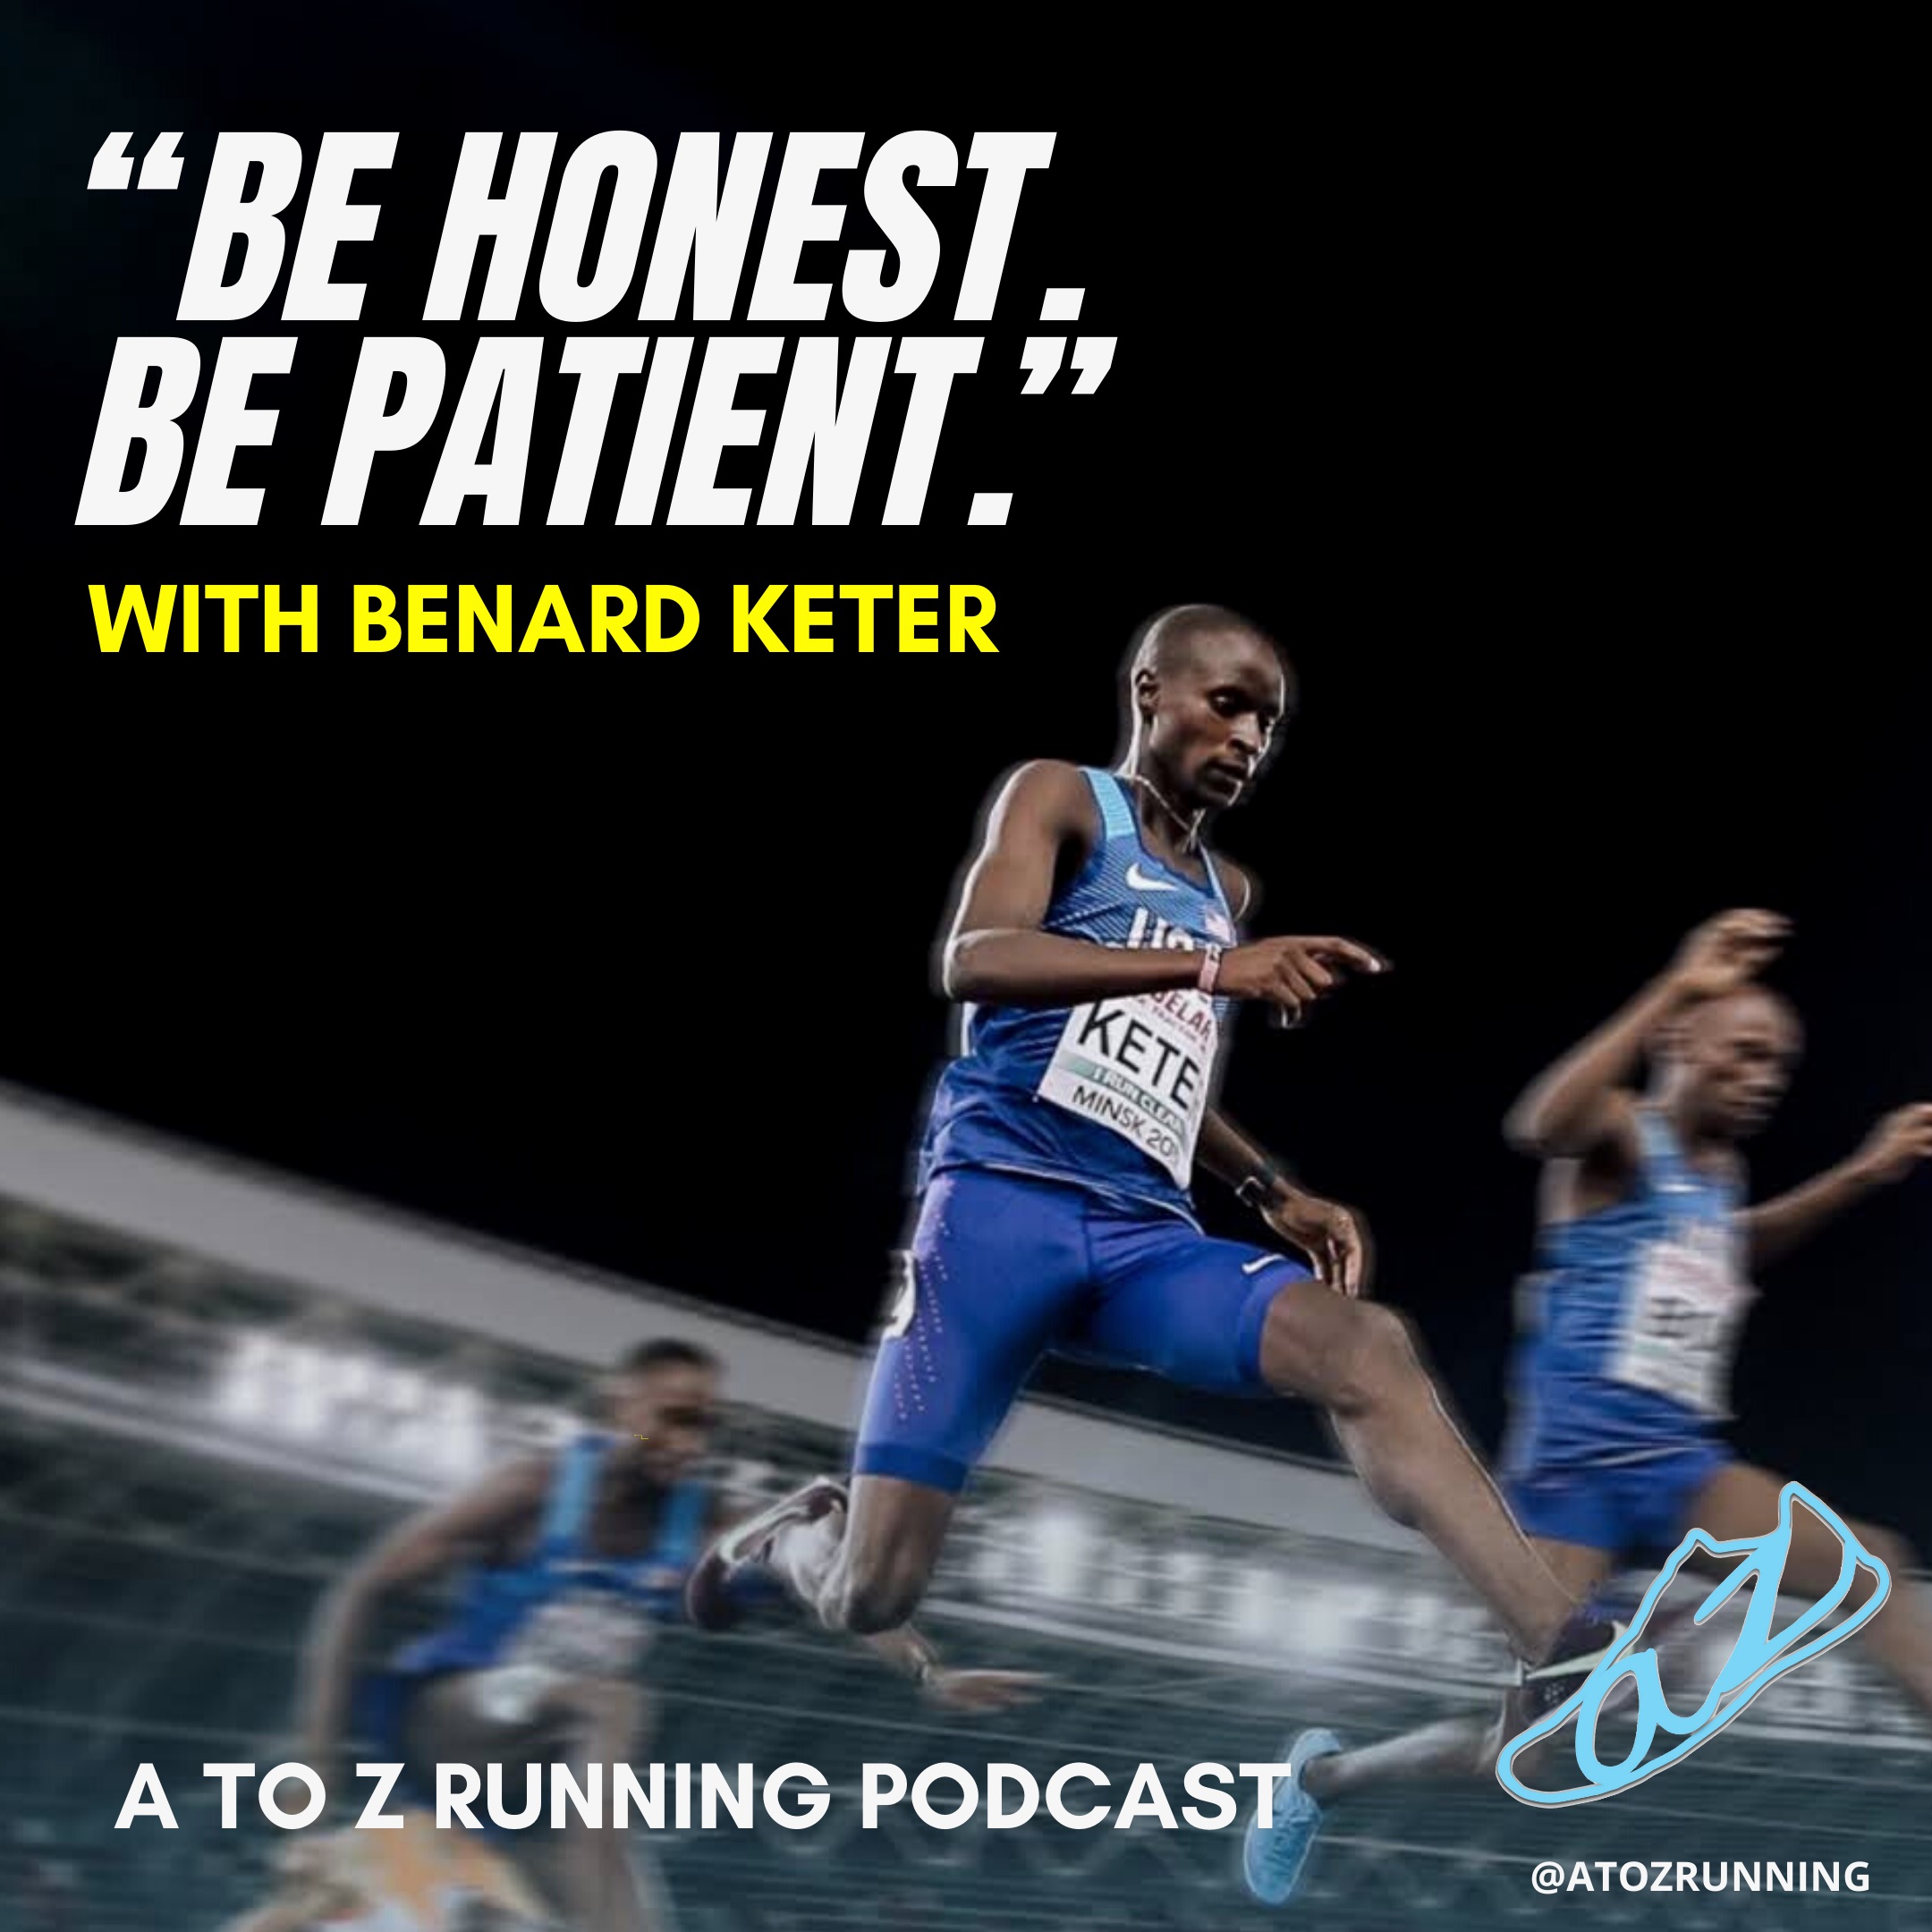 Benard Keter Hurdling a steeplechase barrier on the track with the words, "Be honest. Be Patient." with Benard Keter on the A to Z Running Podcast. Photo is at the track at night under the lights.